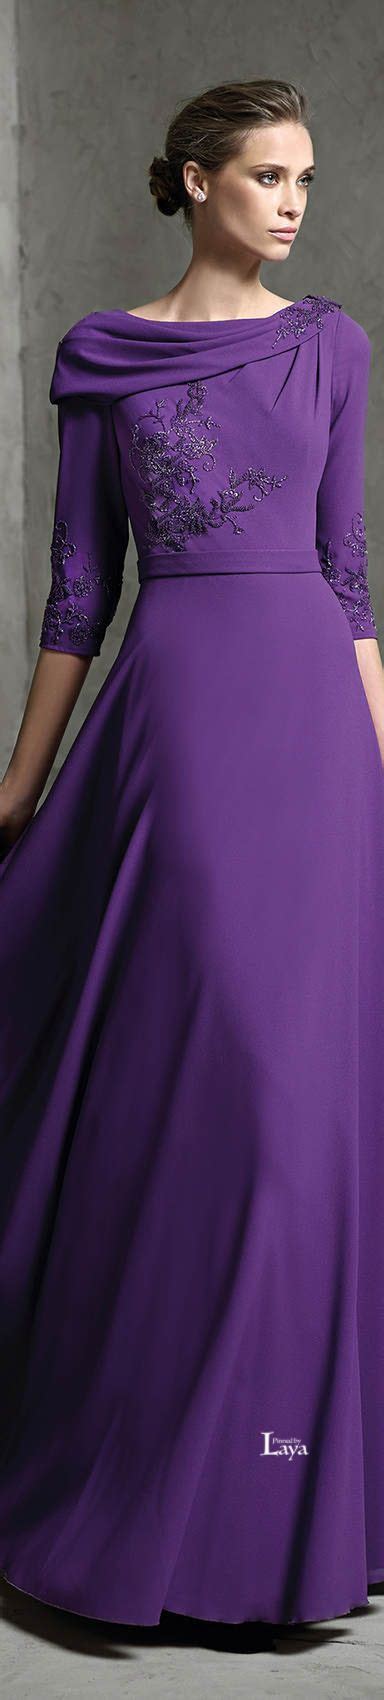 Purple Evening Dress Evening Gowns With Sleeves Beautiful Dresses Gowns